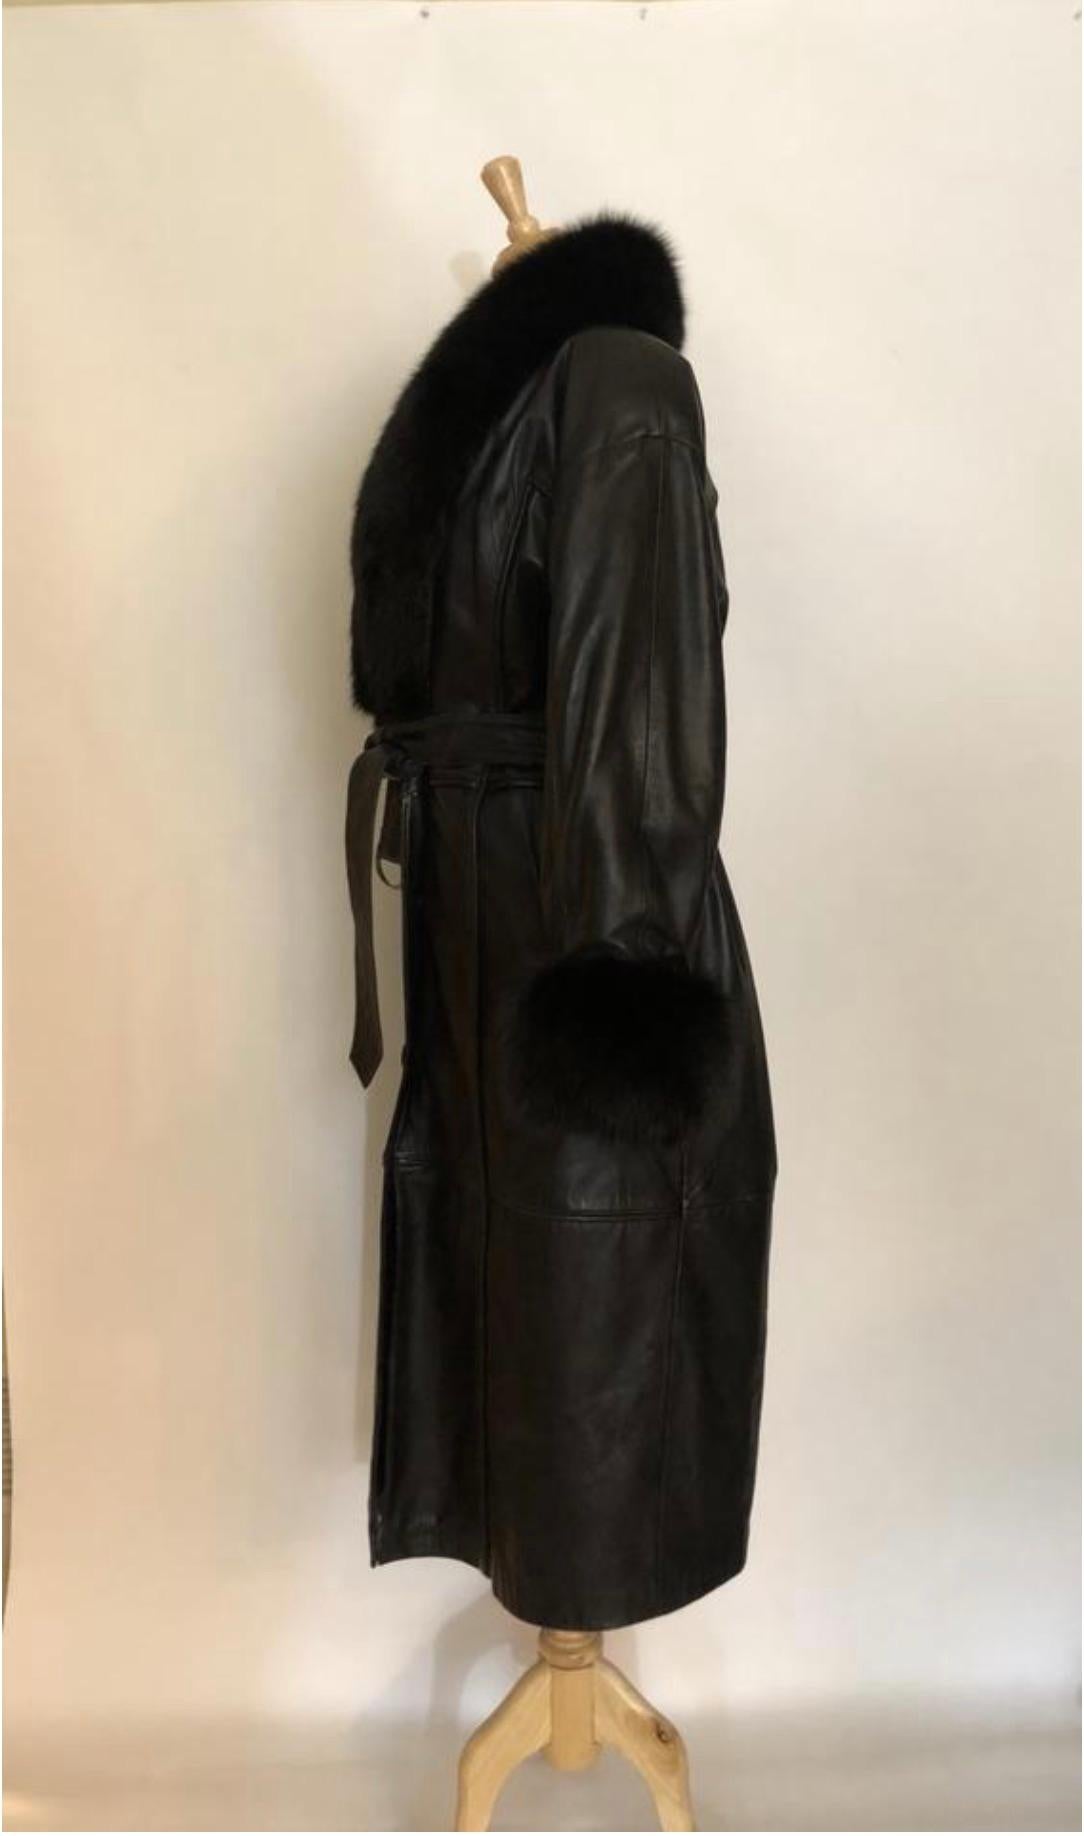 MODEL - Adolfo Black Leather and Fox Long Winter Coat with Belt

CONDITION - Exceptional! No visible signs of wear.

SKU - AIS

ORIGINAL RETAIL PRICE - $1995 + tax

SIZE - Medium

FIT - Regular

MATERIAL - Leather, Fox and Silk

SLEEVE LENGTH -